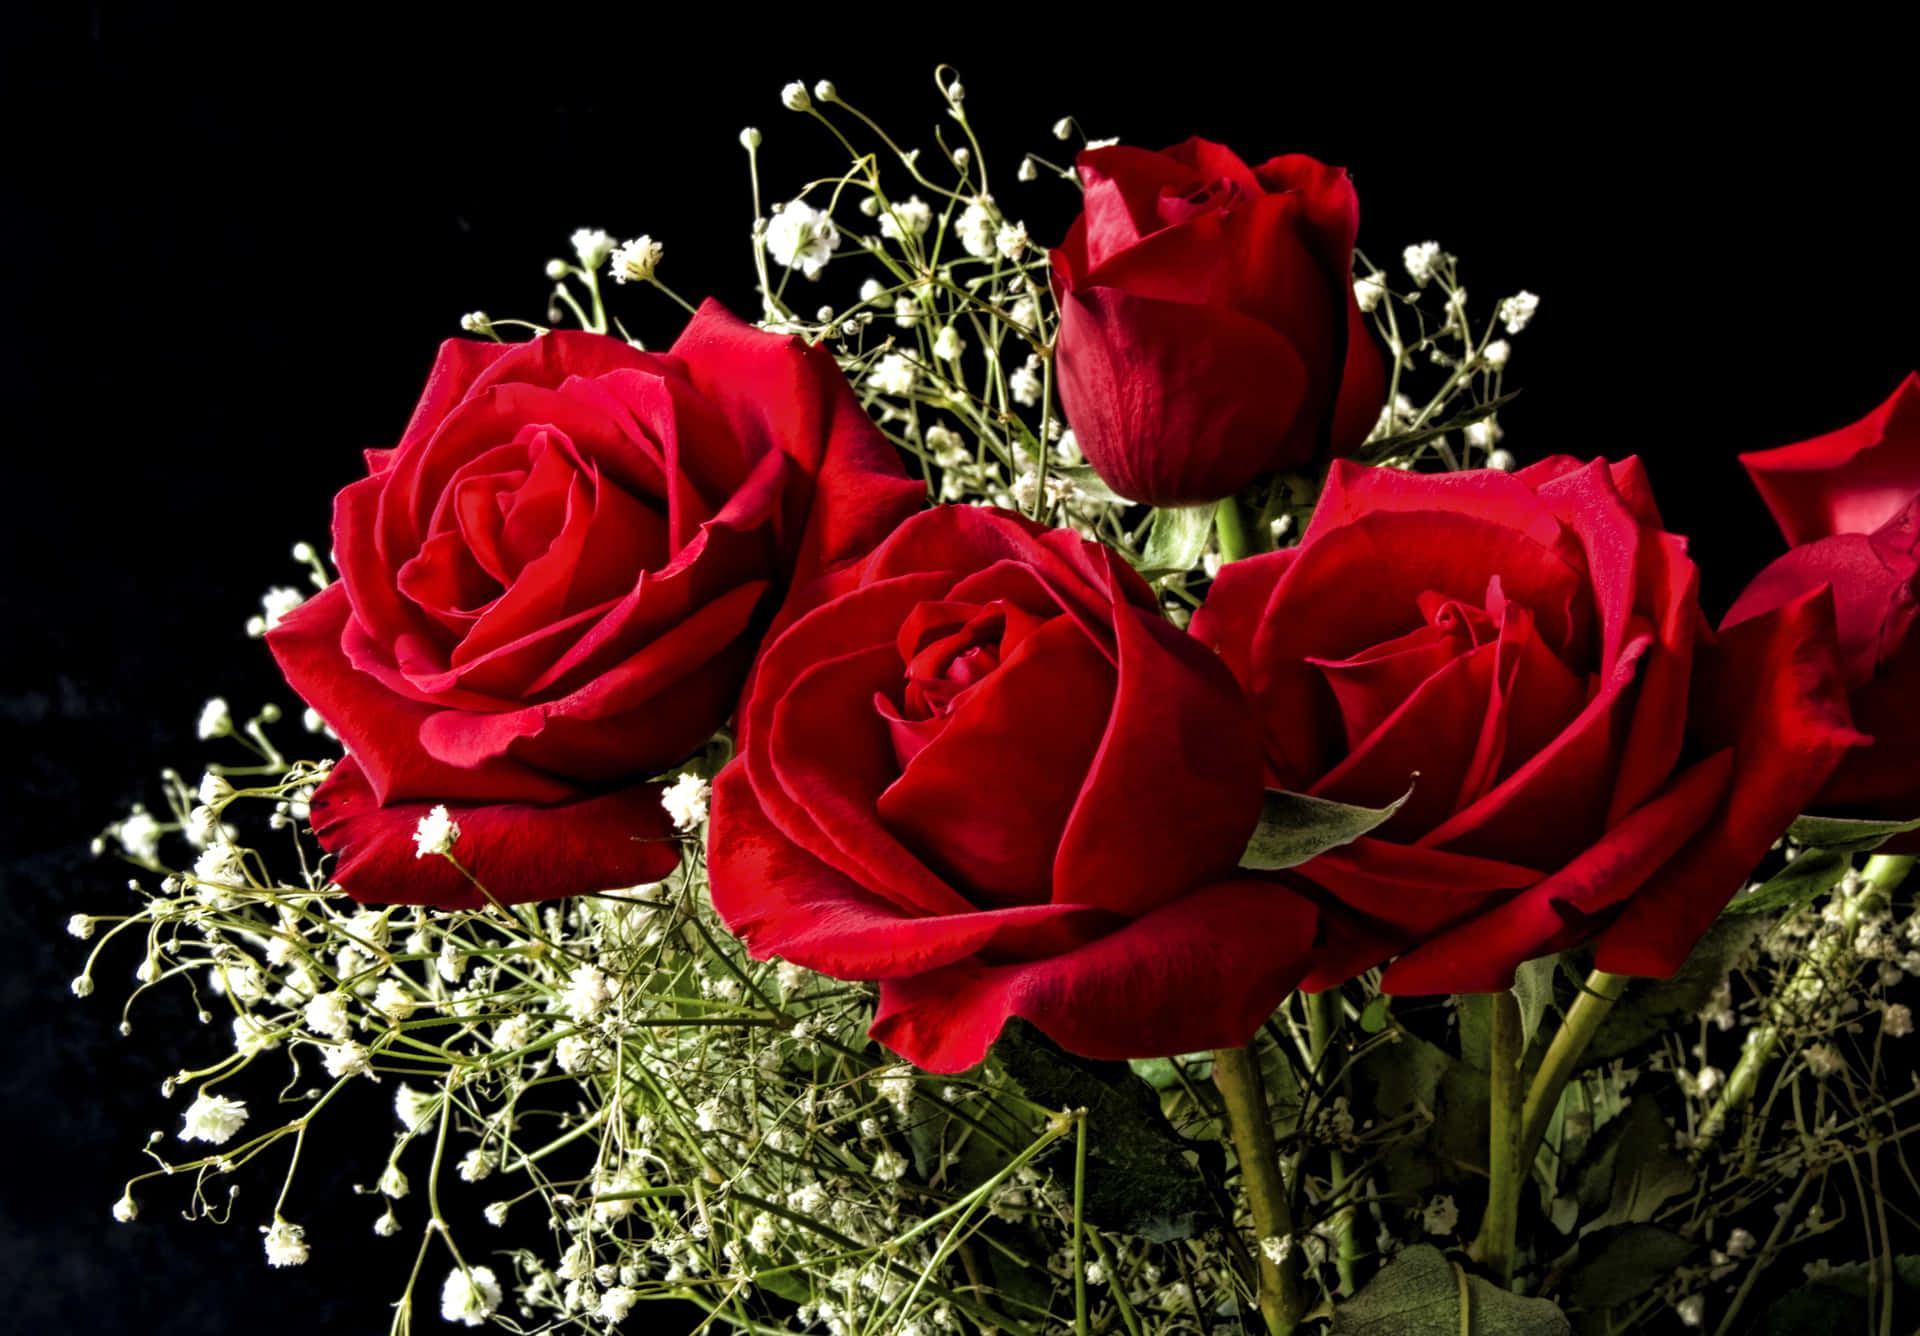 470500 Red Roses Stock Photos Pictures  RoyaltyFree Images  iStock  Red  roses bouquet Red roses background Red roses white background